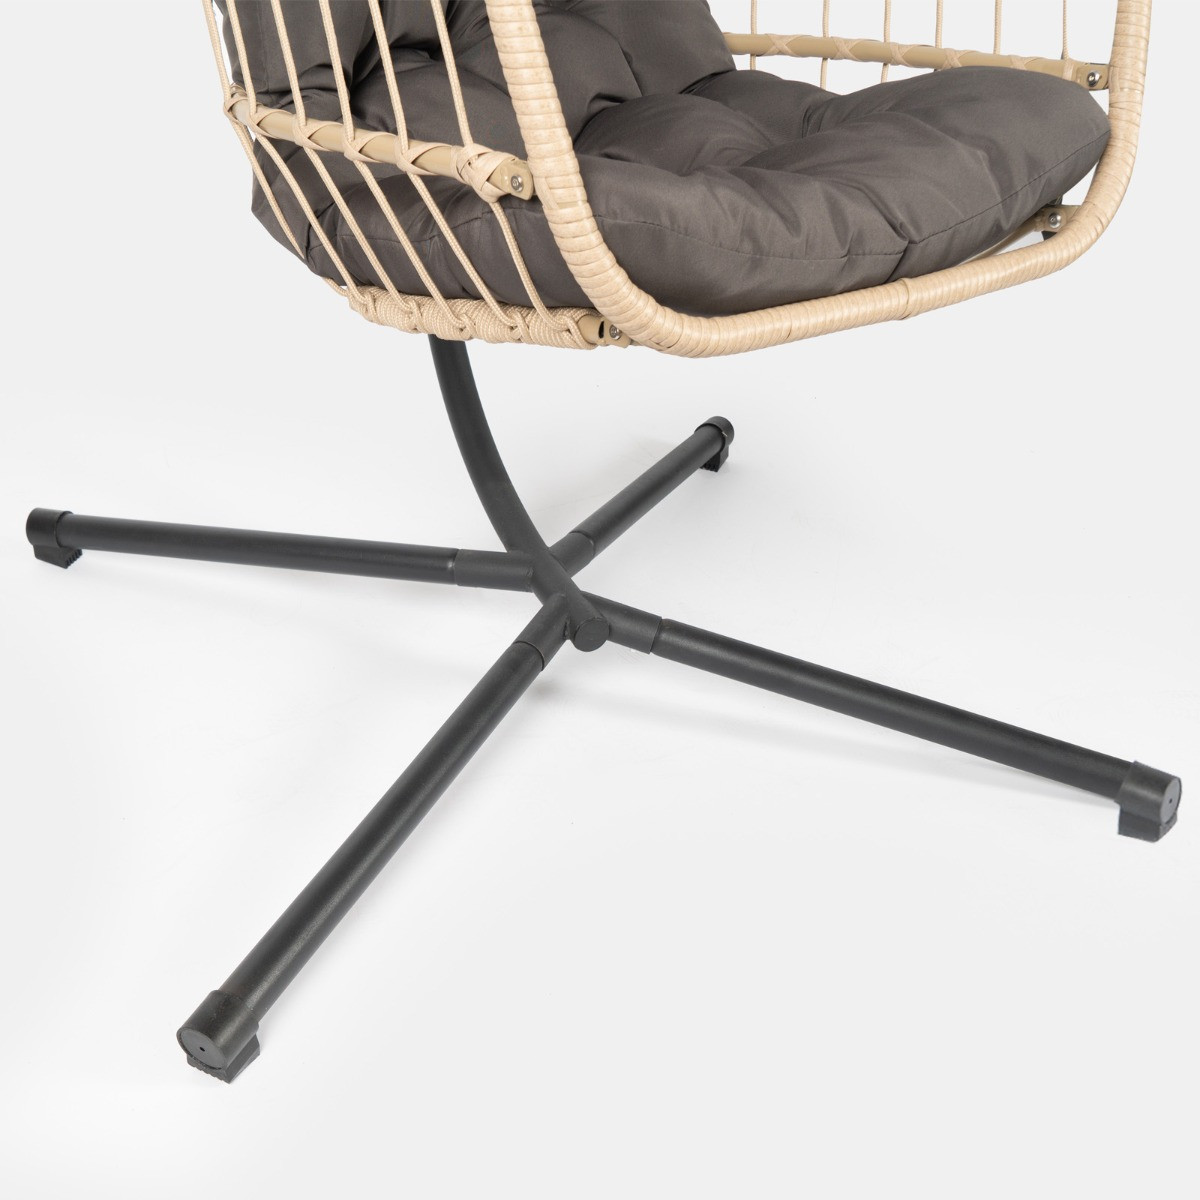 OHS Foldable Hanging Egg Chair - Natural >